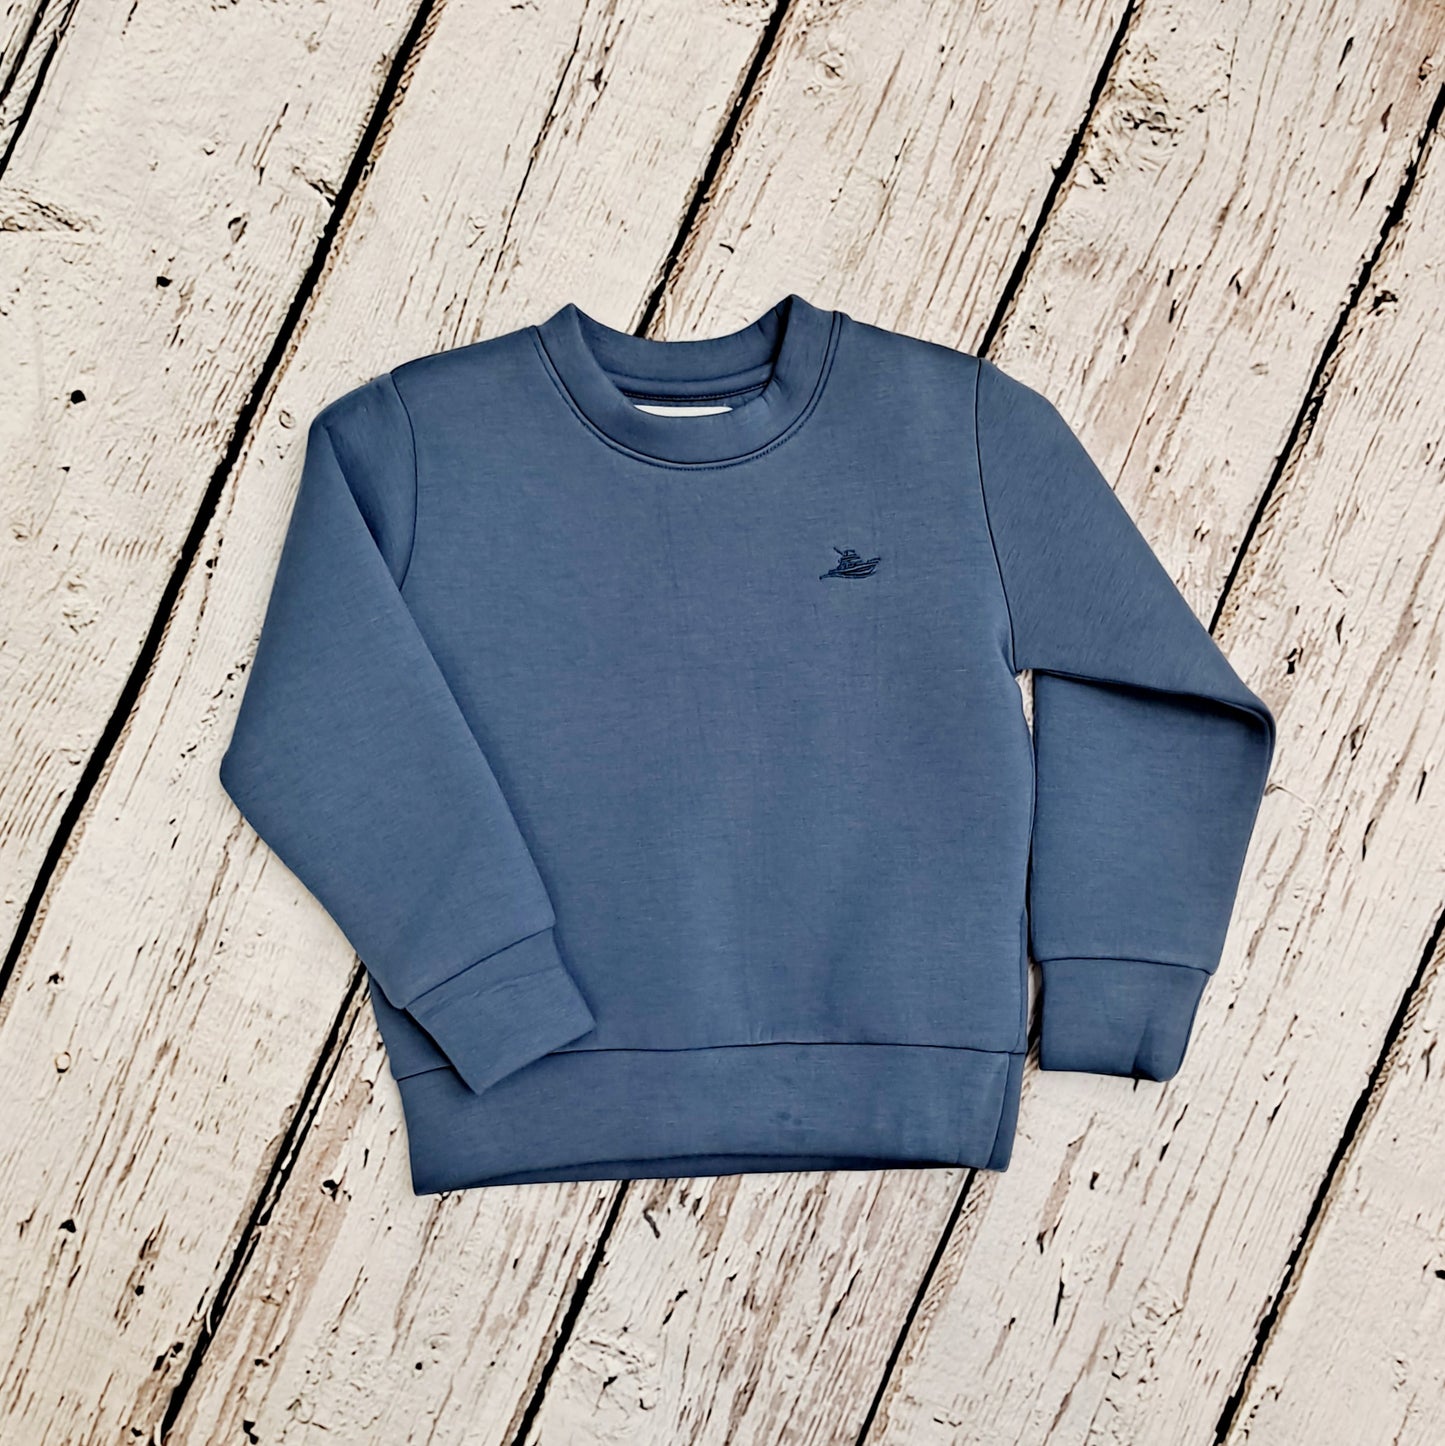 SouthBound - Perf Sweatshirt Classic Blue